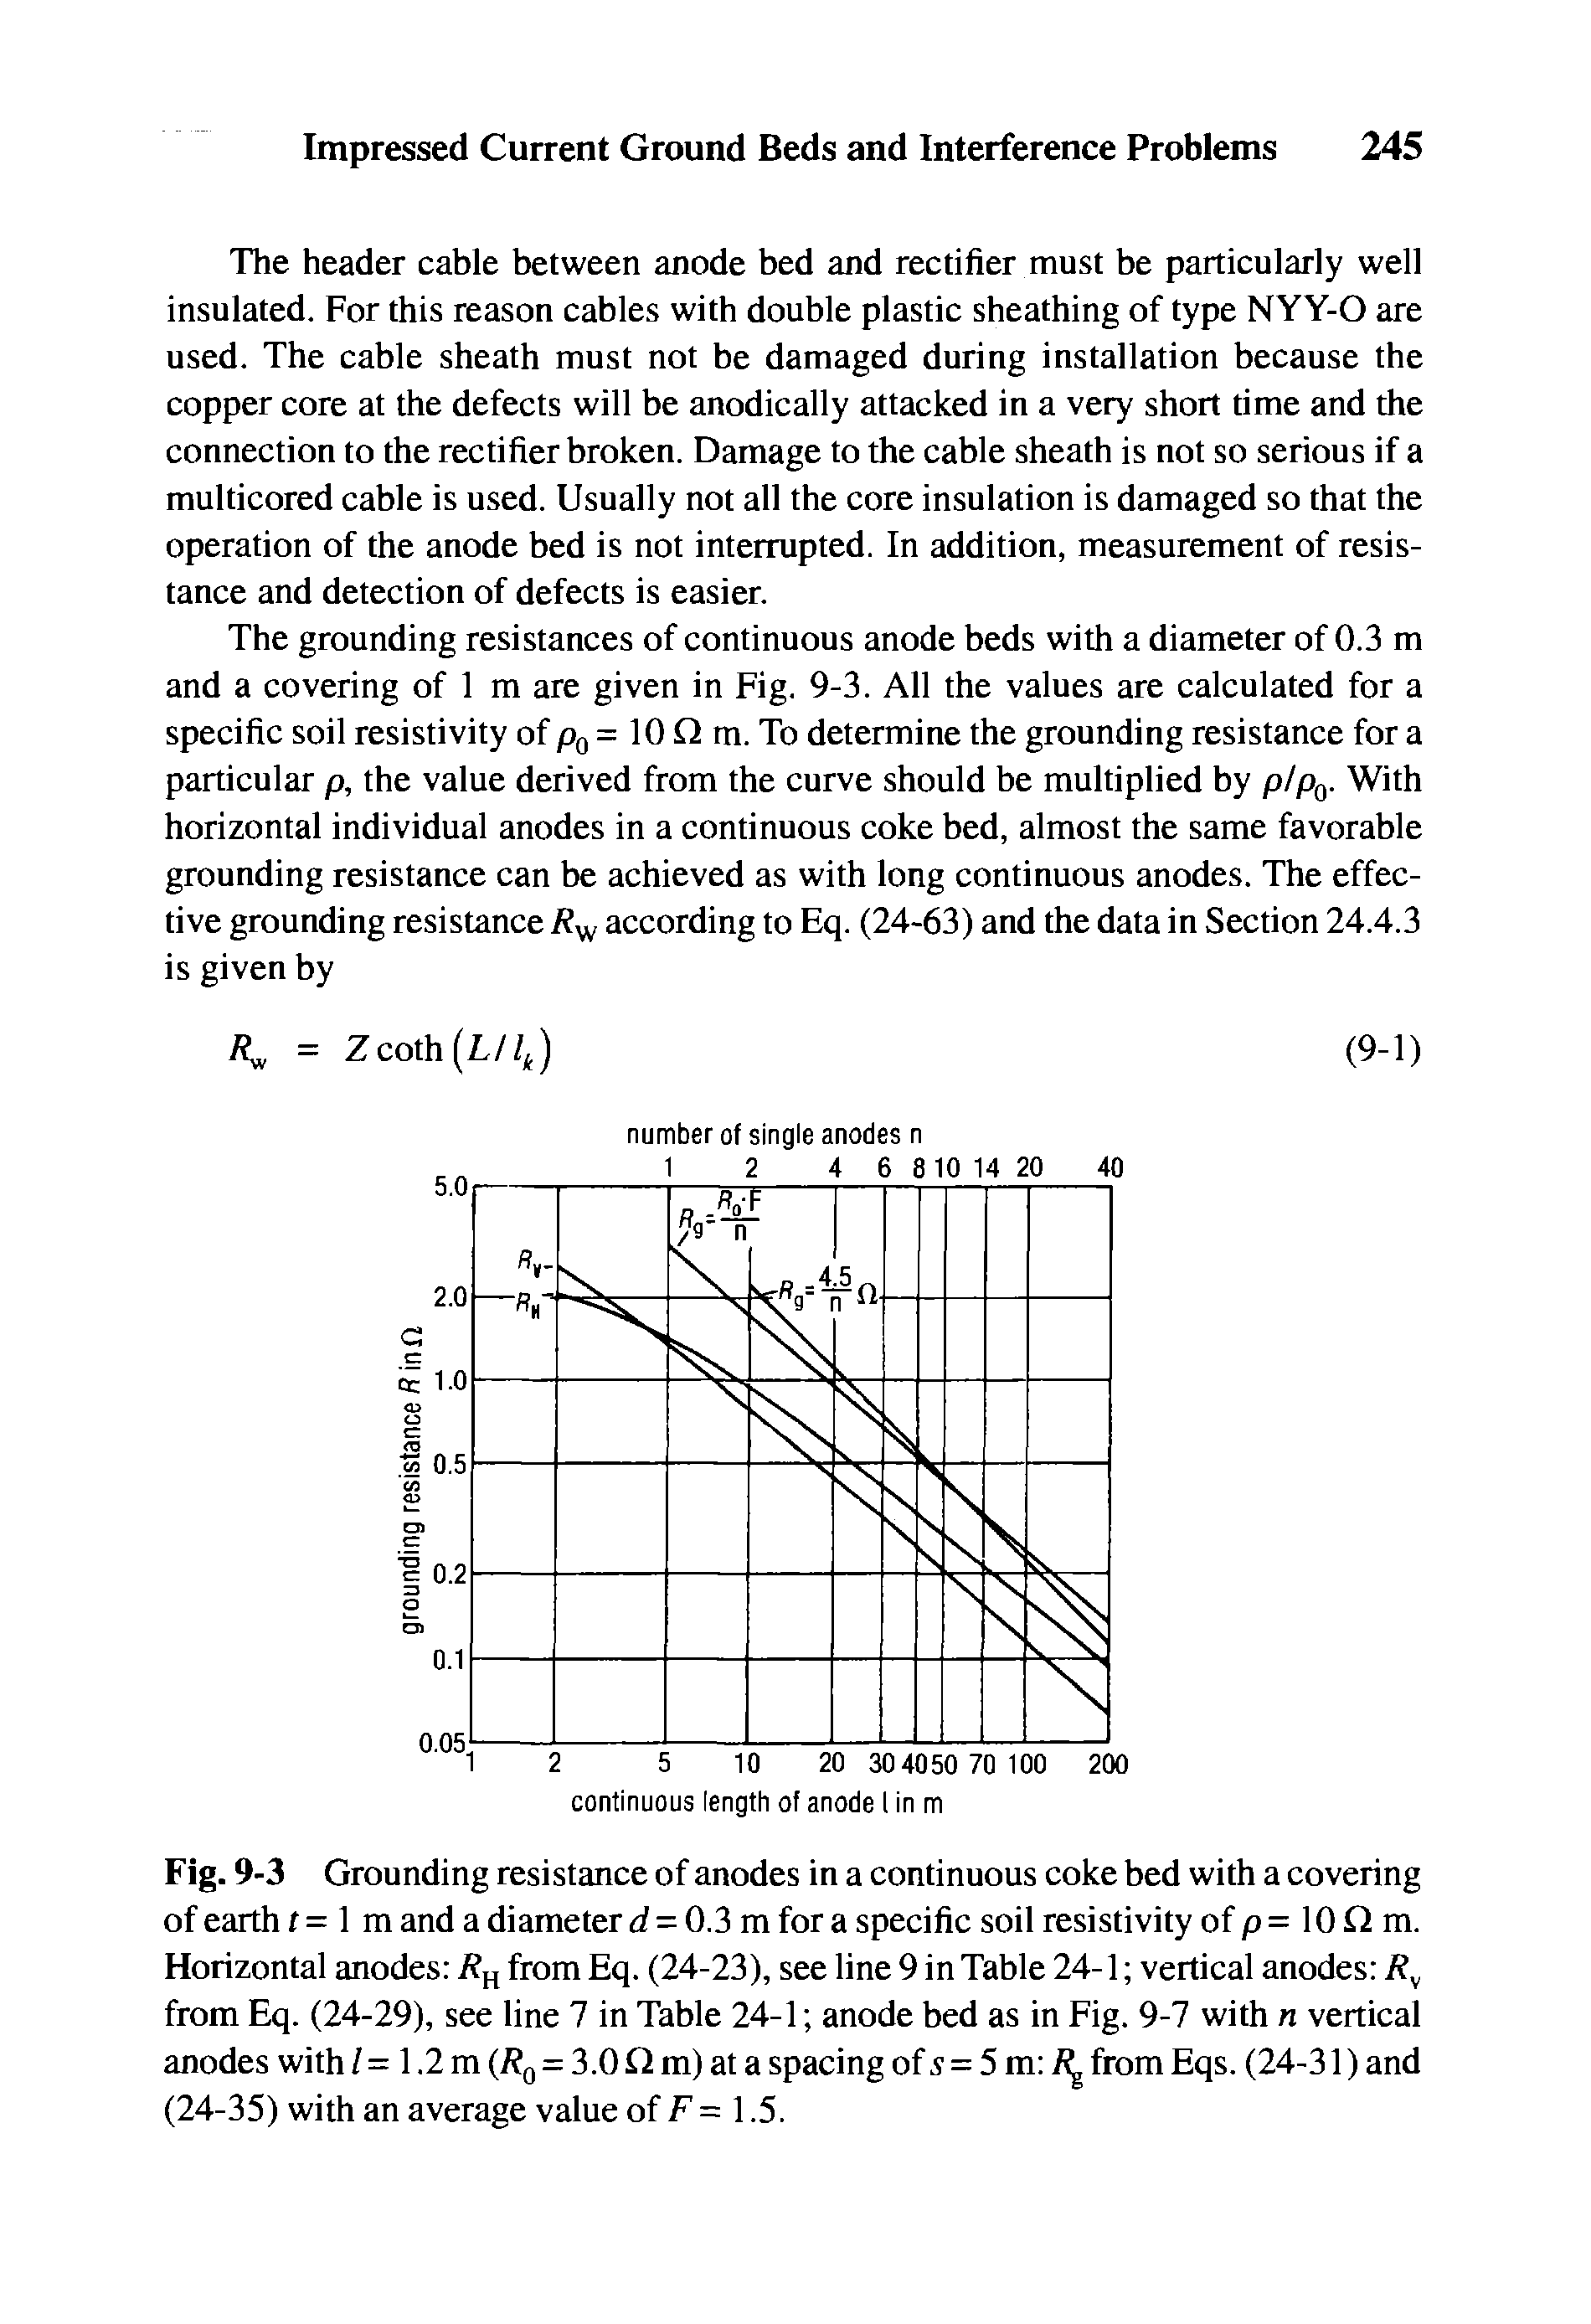 Fig. 9-3 Grounding resistance of anodes in a continuous coke bed with a covering of earth t = 1 m and a diameter d = 0.3 m for a specific soil resistivity of p = 10 Q m. Horizontal anodes from Eq. (24-23), see line 9 in Table 24-1 vertical anodes R ...